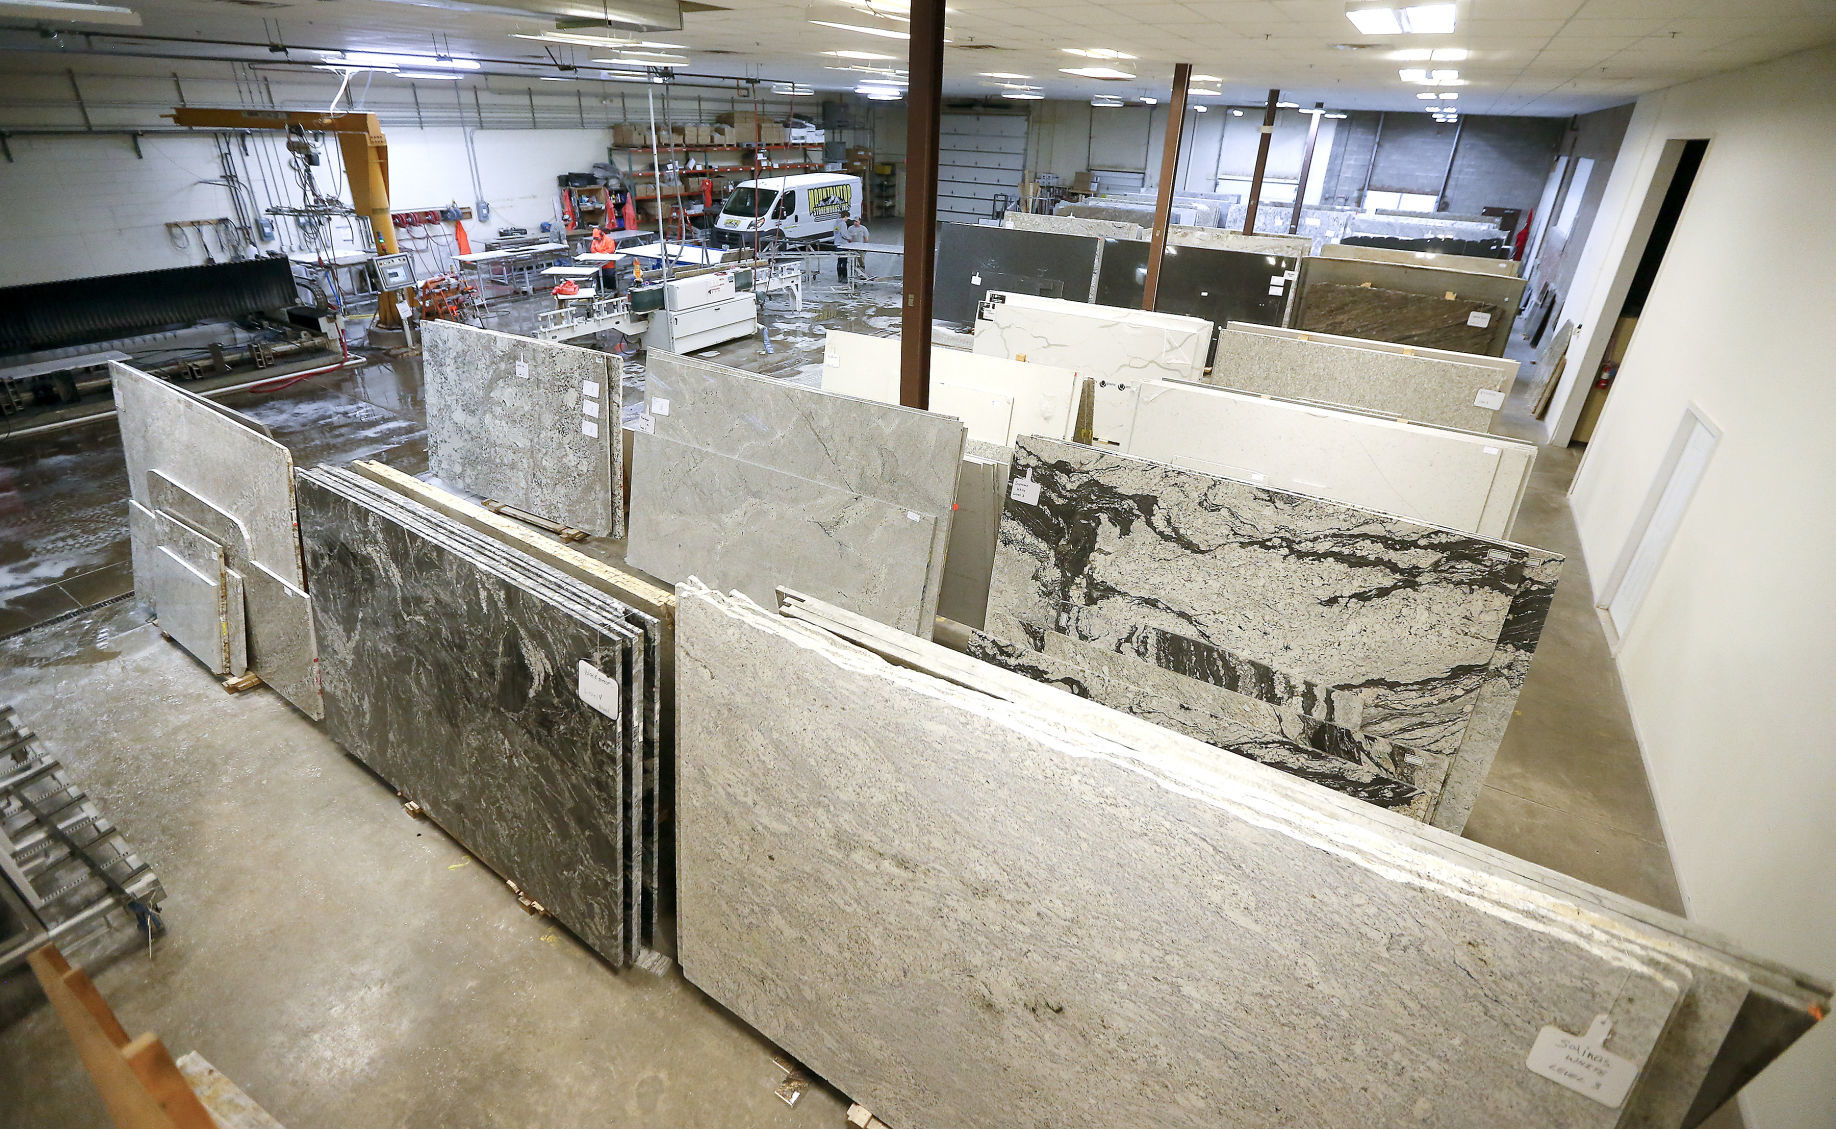 Huge pieces of granite wait to be cut at Mountaintop Stoneworks, Inc. in Dubuque.    PHOTO CREDIT: Dave Kettering